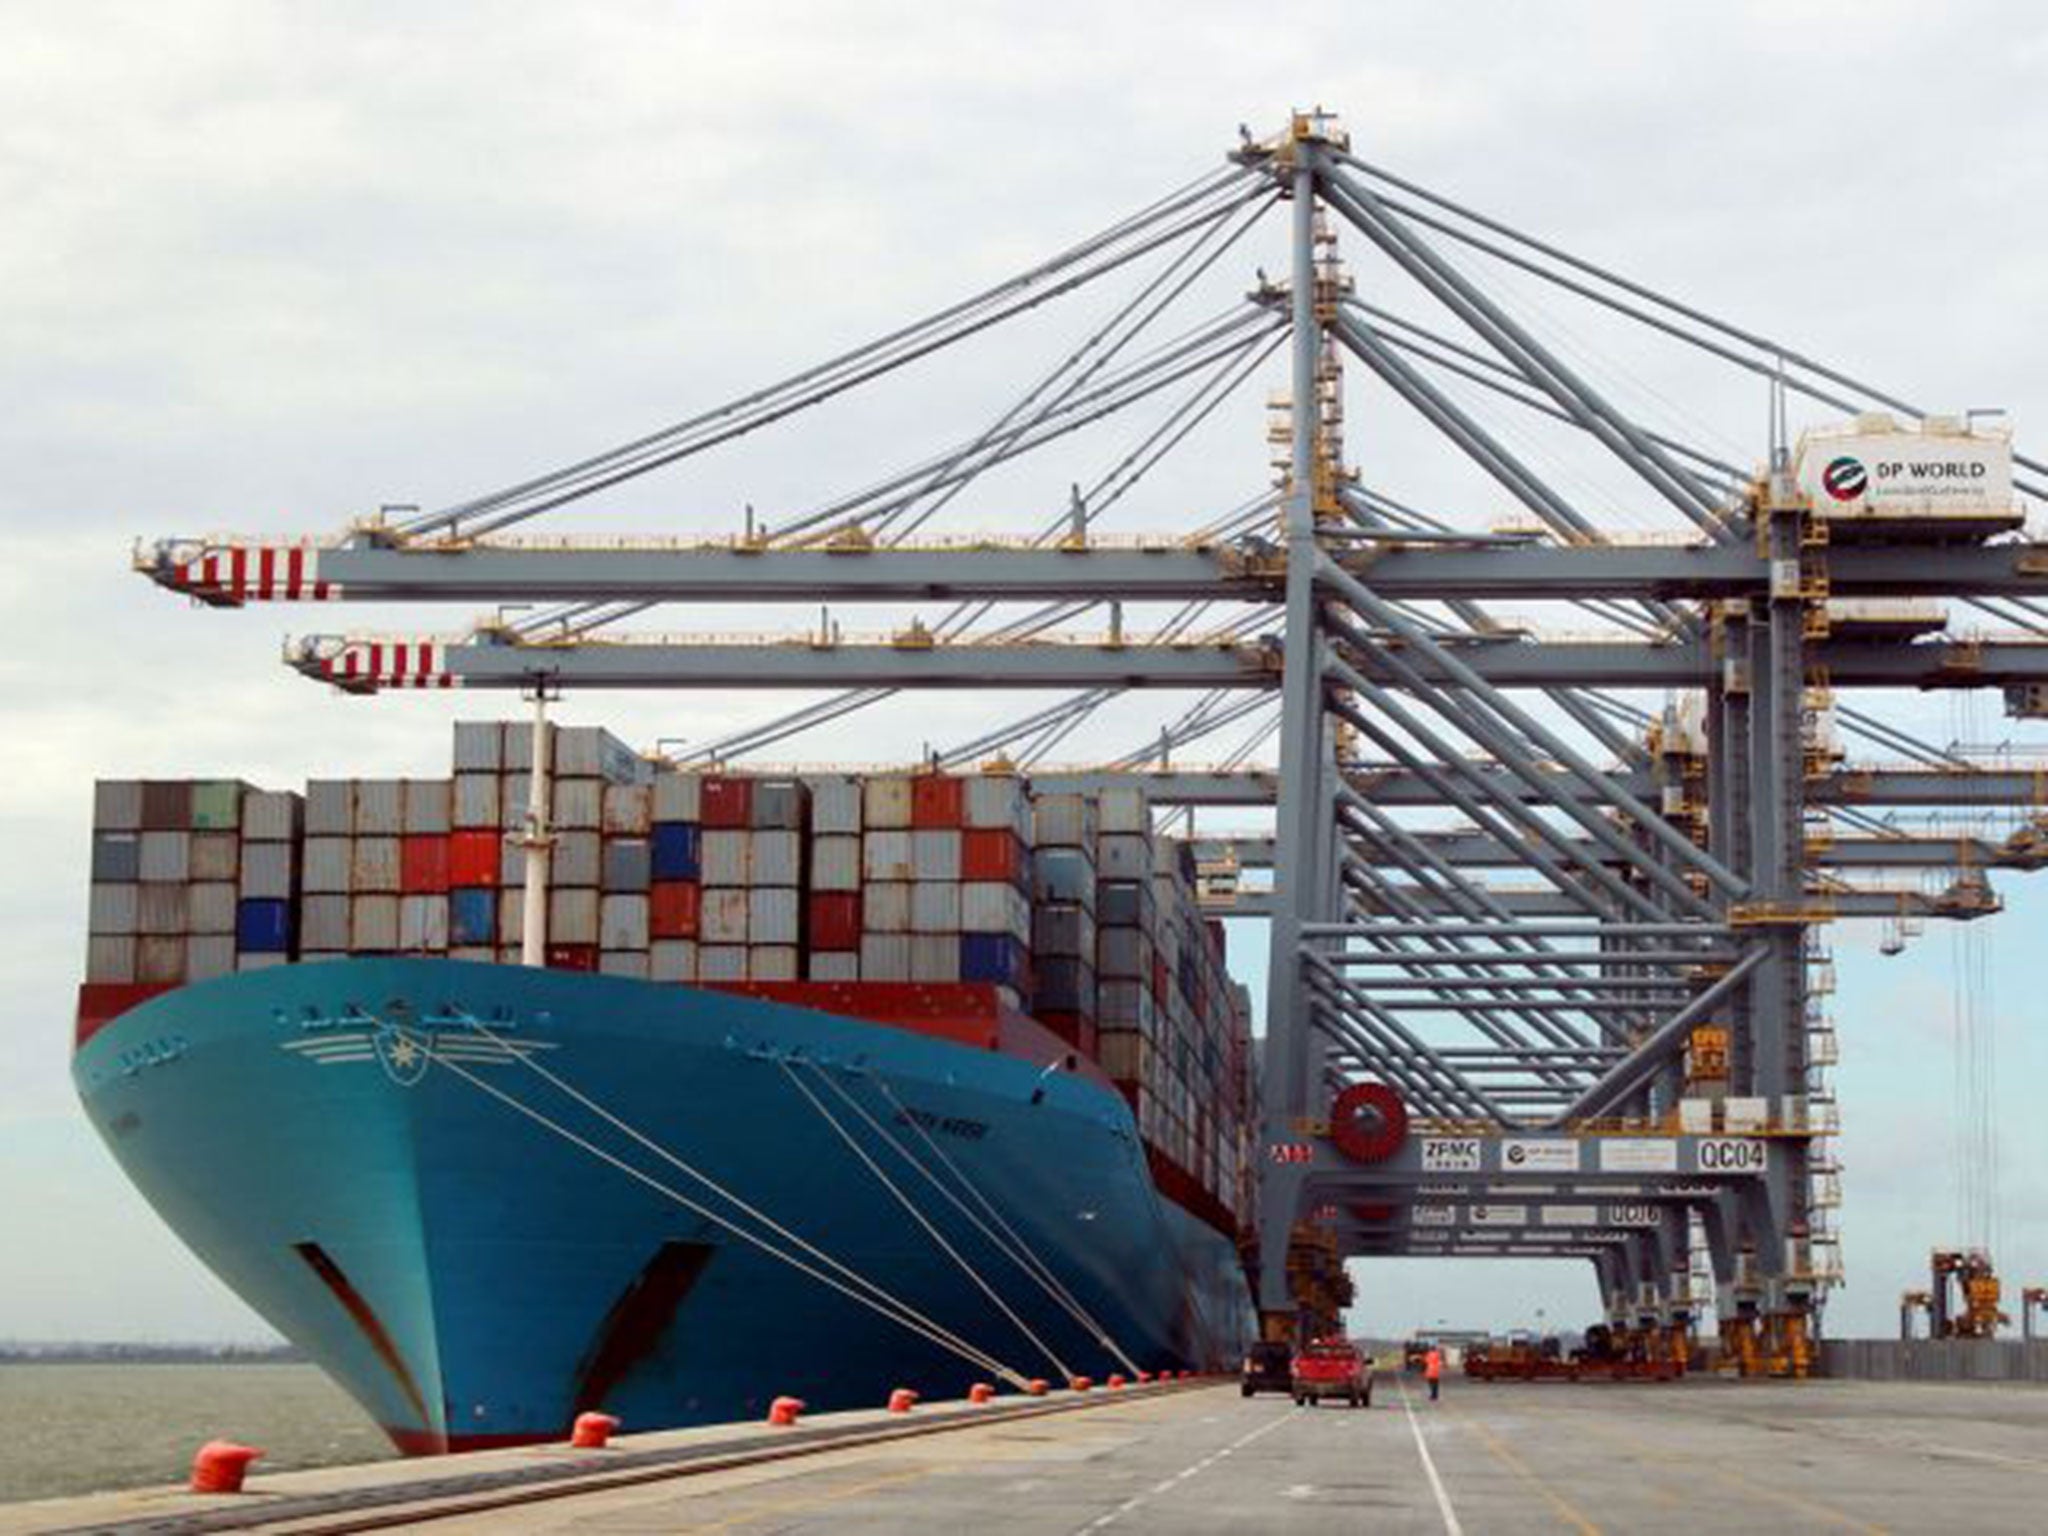 The ‘Edith Maersk’, the biggest ship ever on the Thames